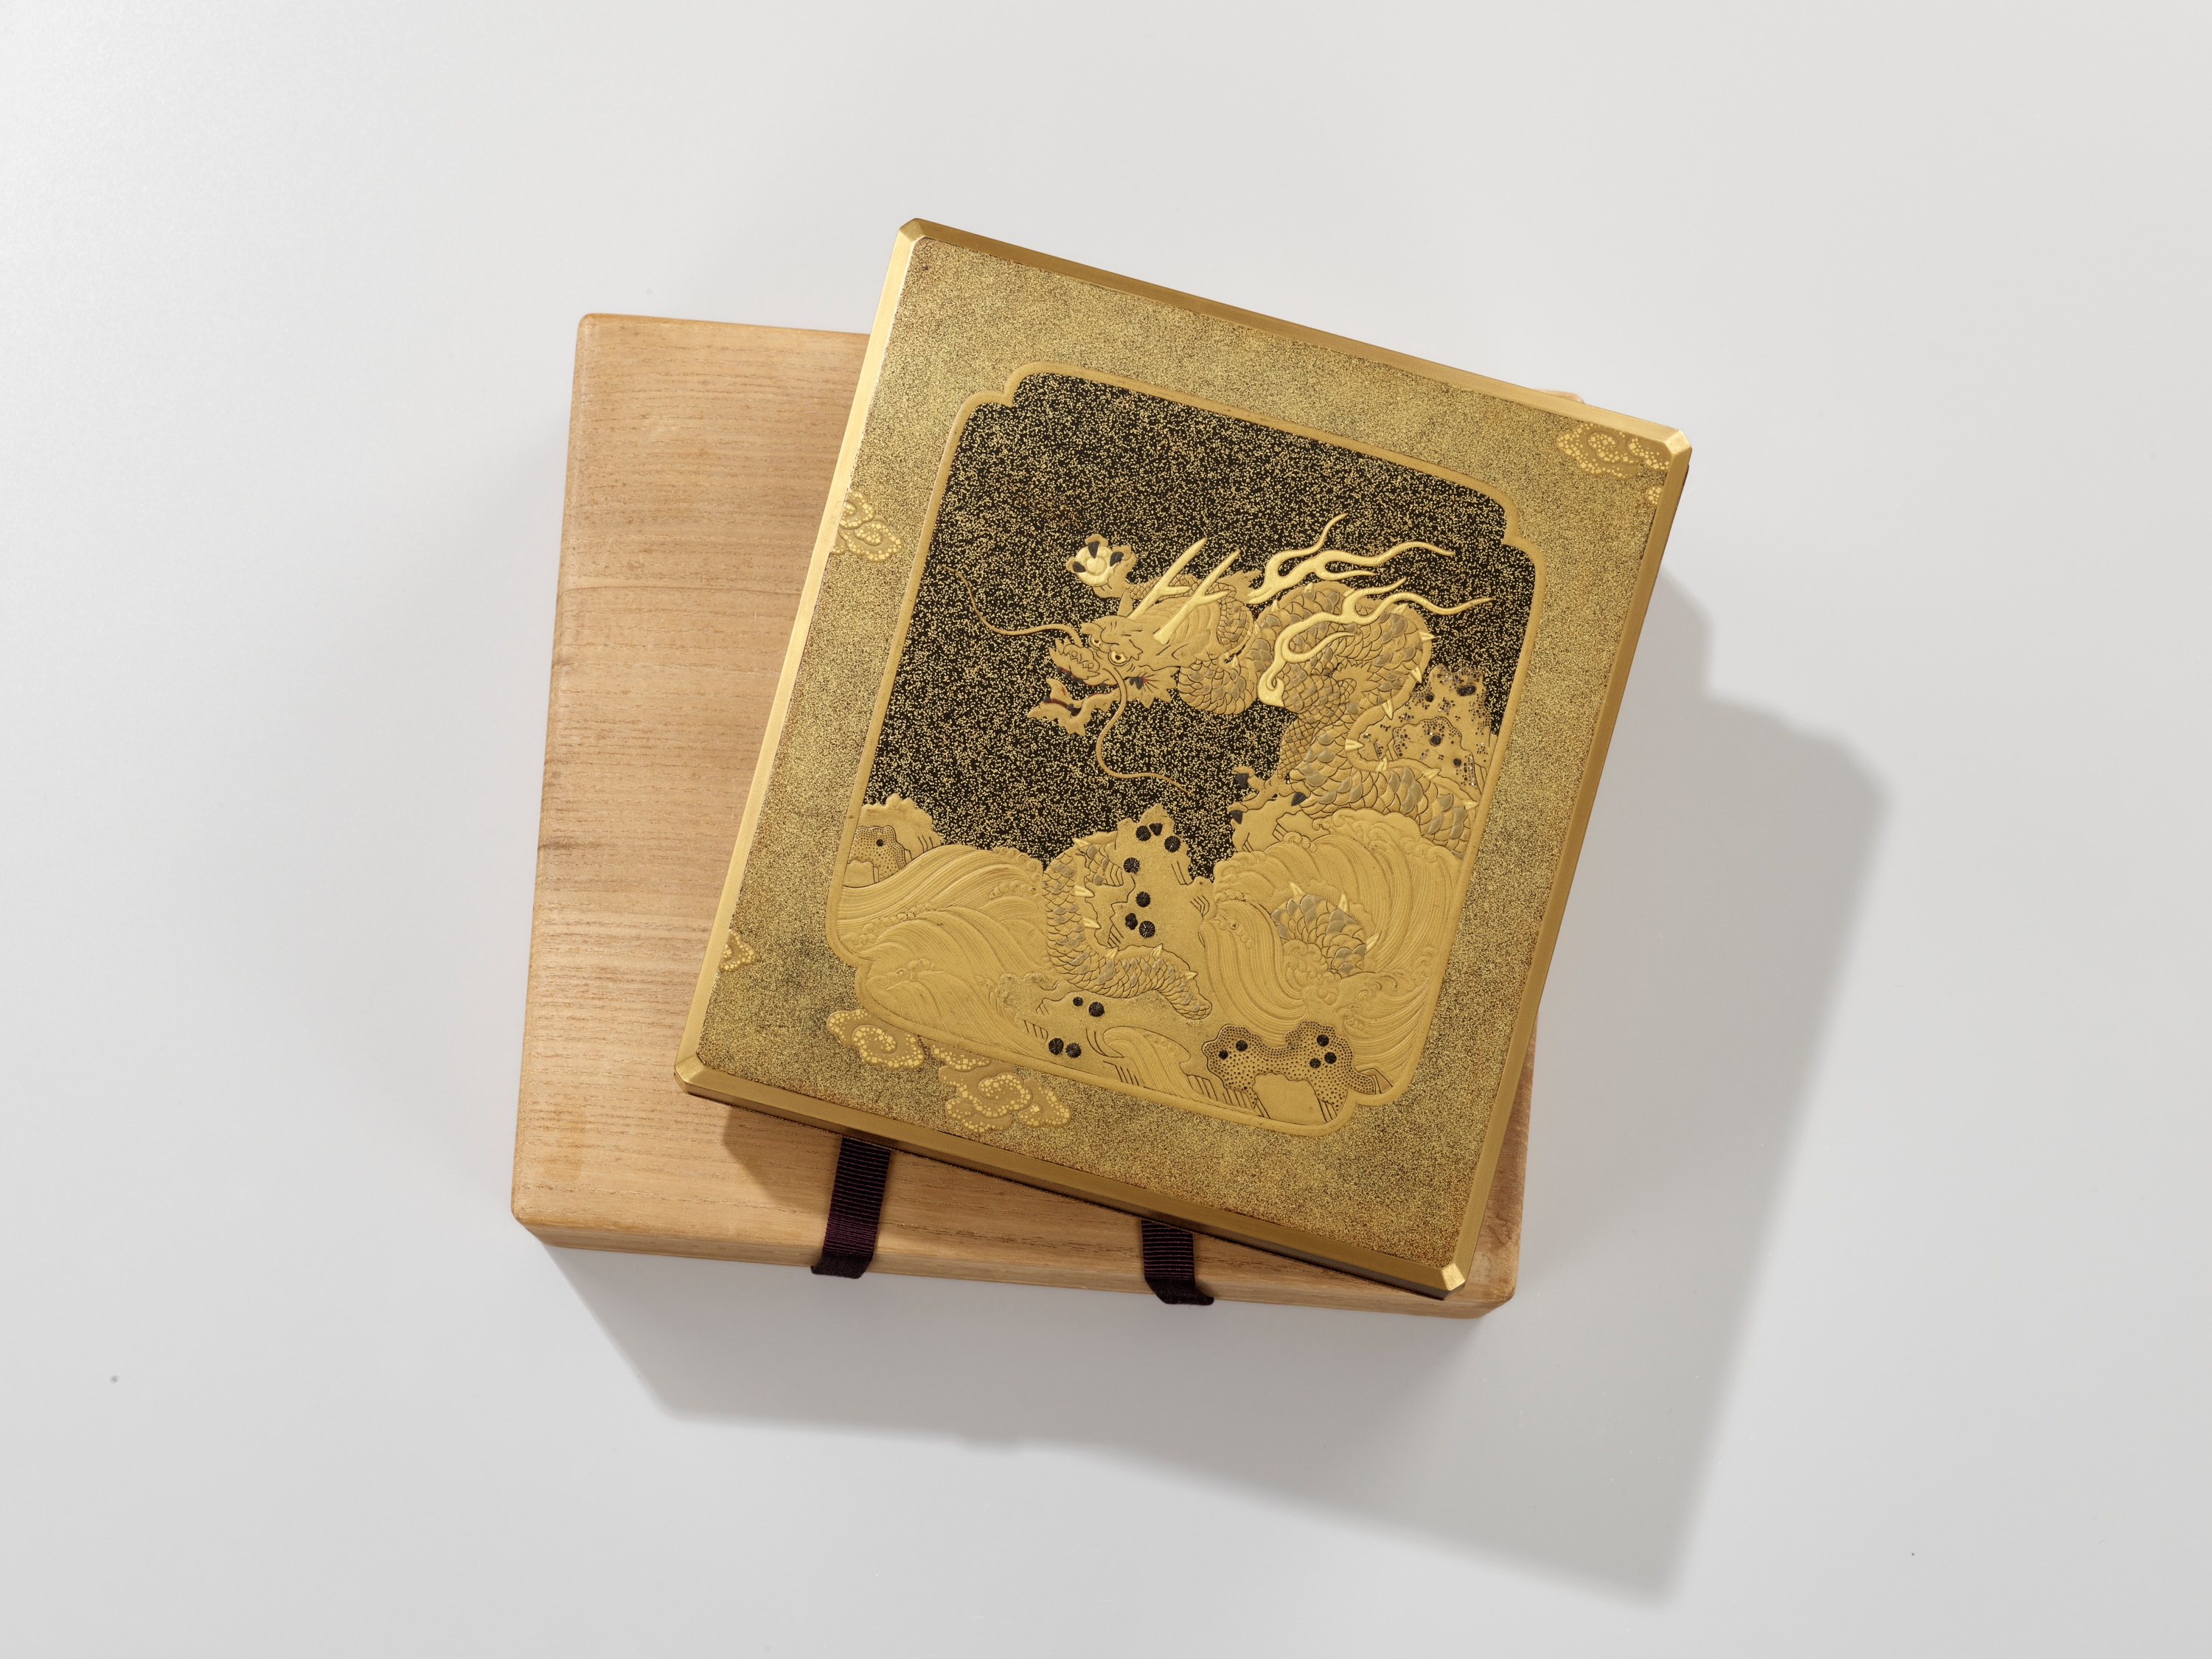 A FINE AND RARE GOLD LACQUER SUZURIBAKO DEPICTING A DRAGON, TIGERS, AND A LEOPARD (FEMALE TIGER) - Image 10 of 12